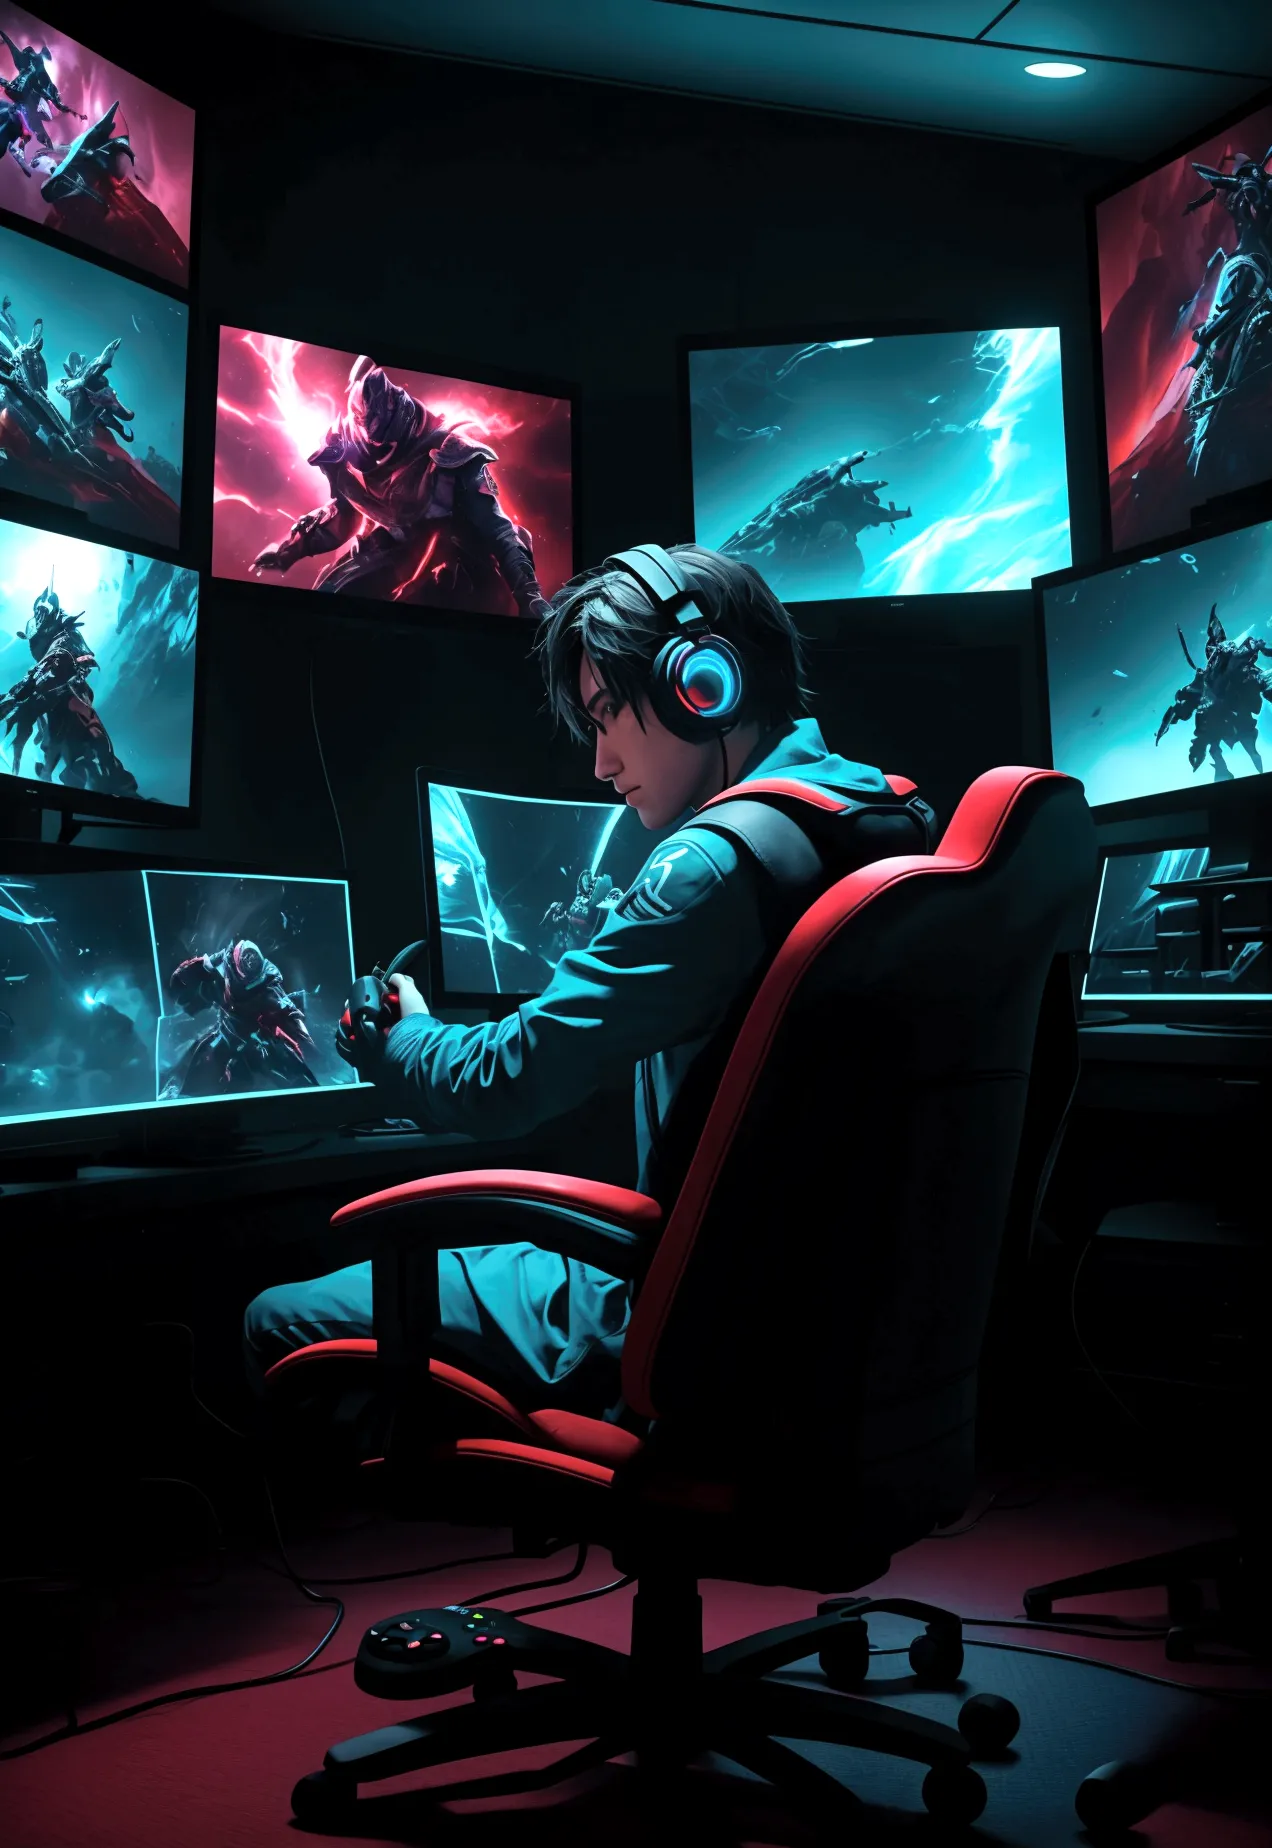 A vibrant image of a gamer with a controller in his hand, in front of several screens with different games.

Graphic elements that resemble consoles and controls.